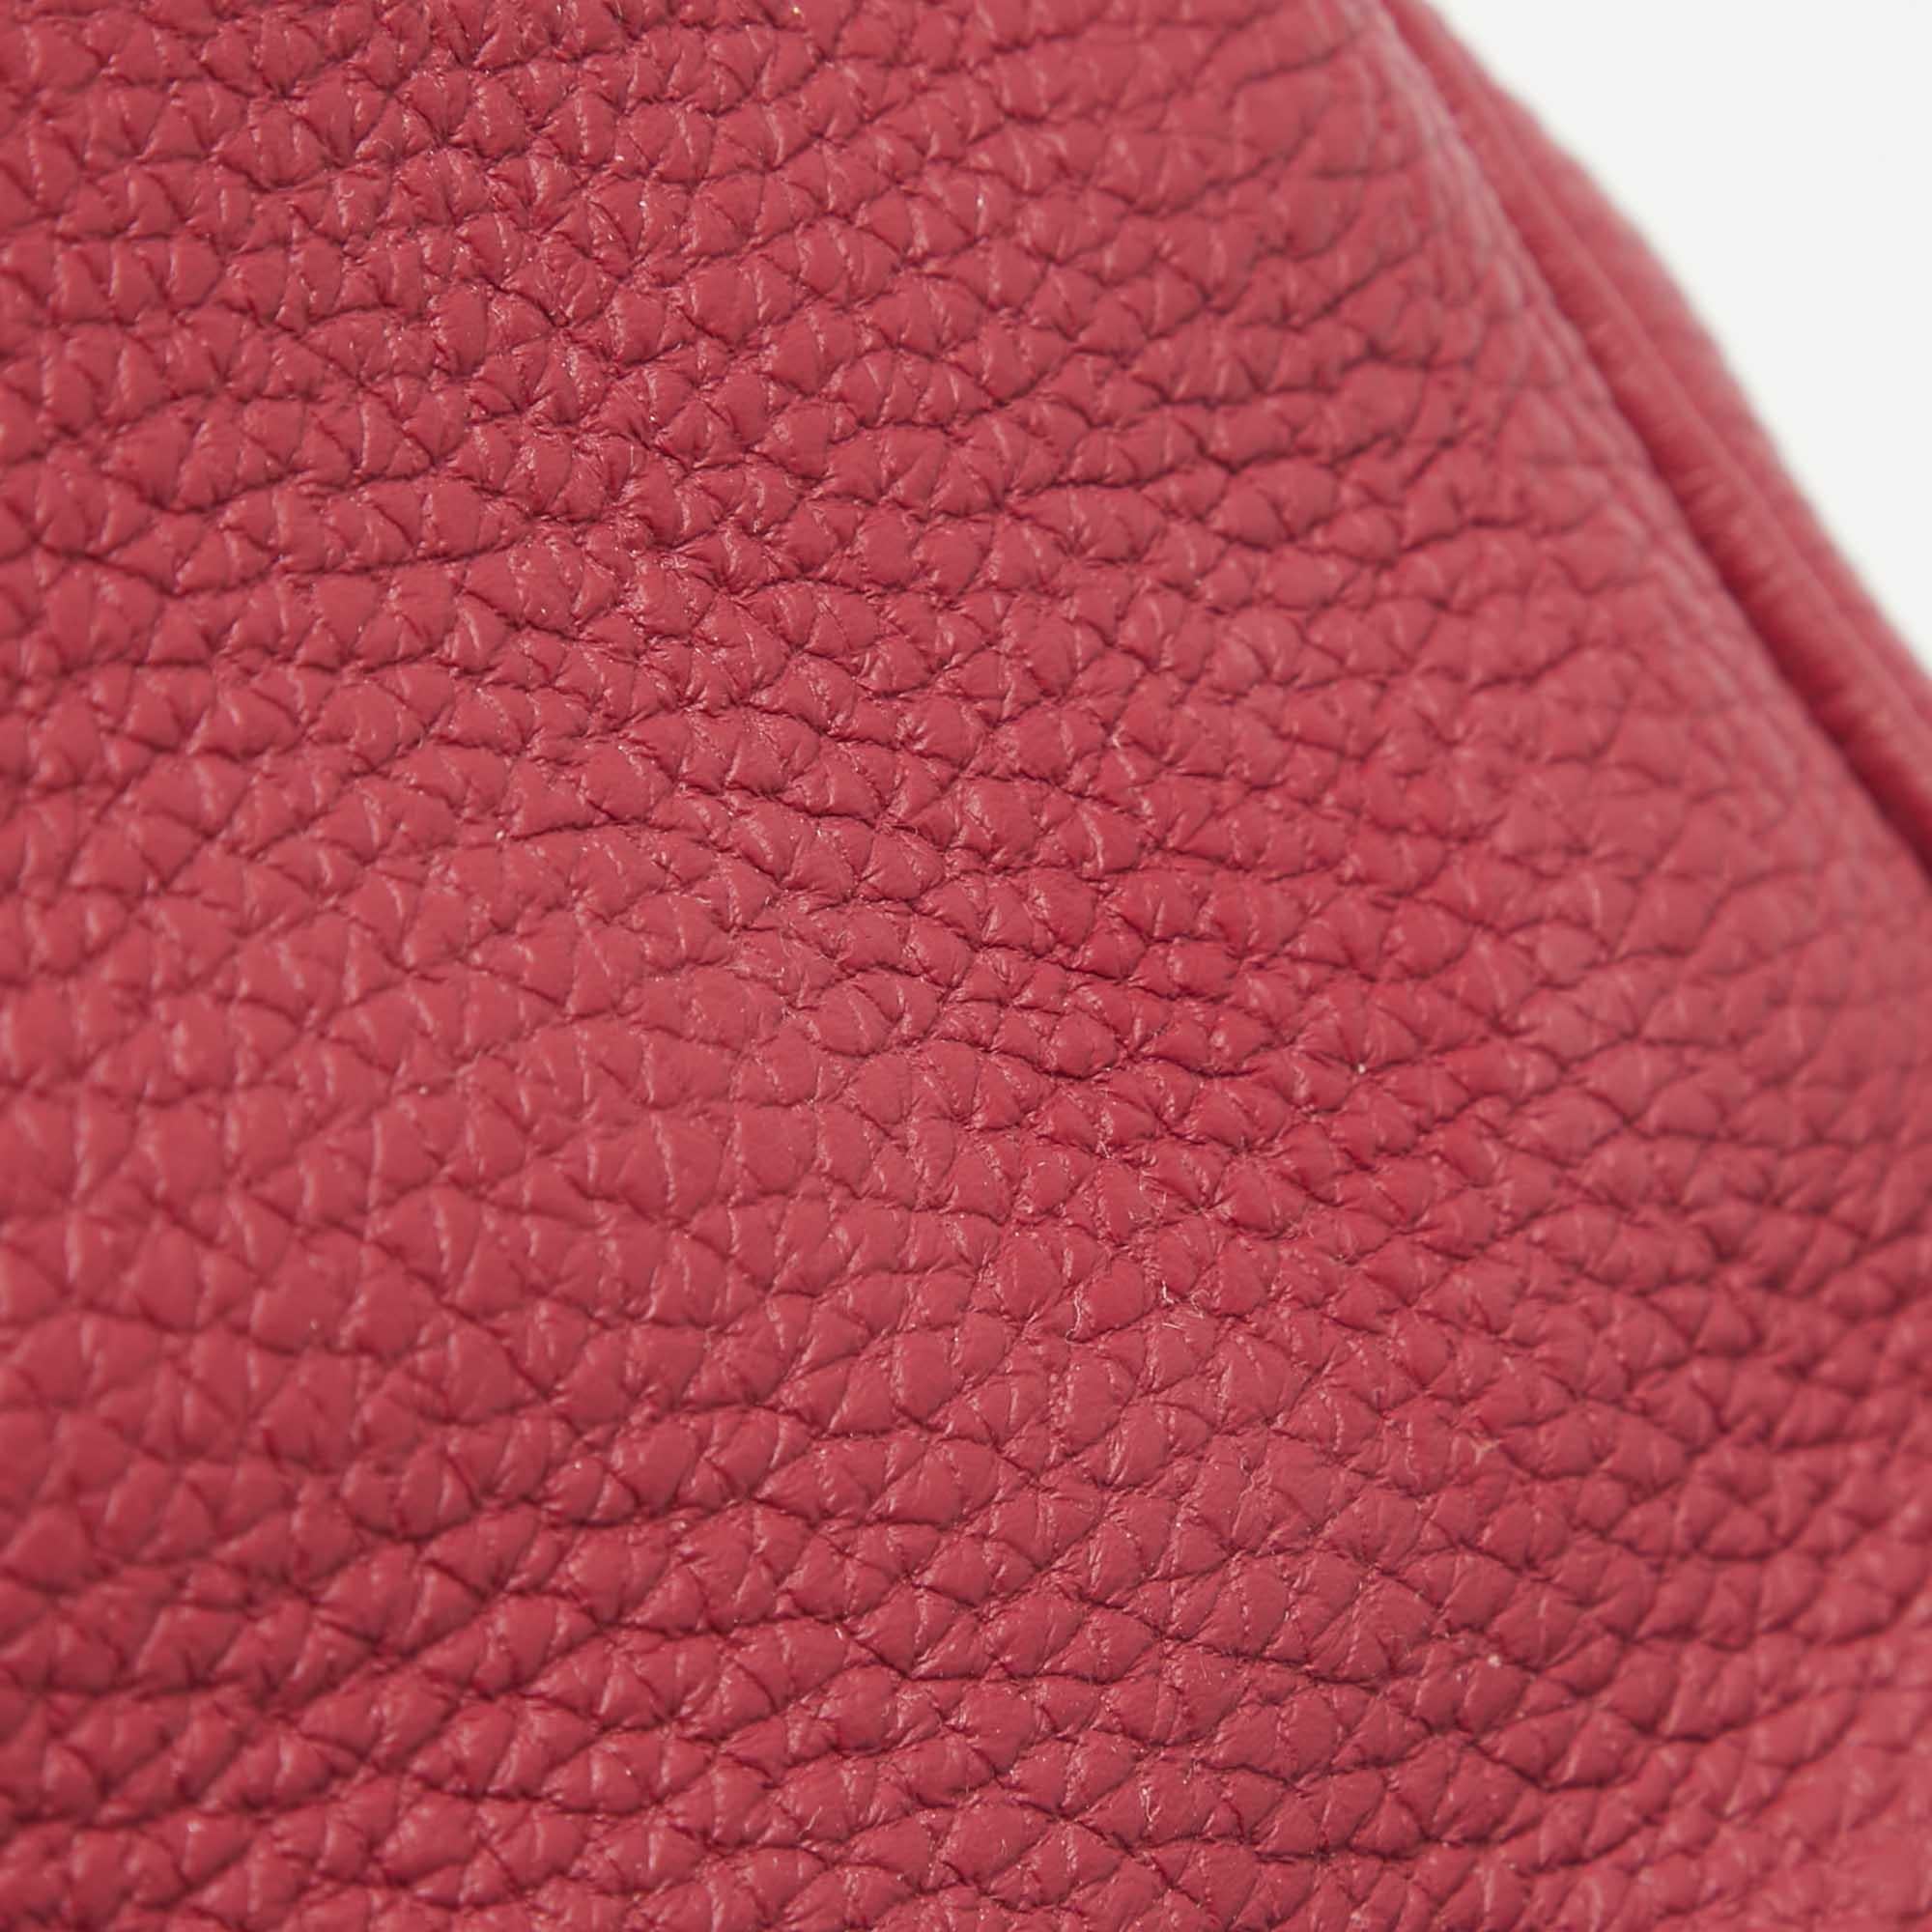 The Hermès Birkin is rightly one of the most desired handbags in the world. Handcrafted from the highest quality leather by skilled artisans, it takes long hours of rigorous effort to stitch a Birkin together. Crafted with expertise, this Birkin 35